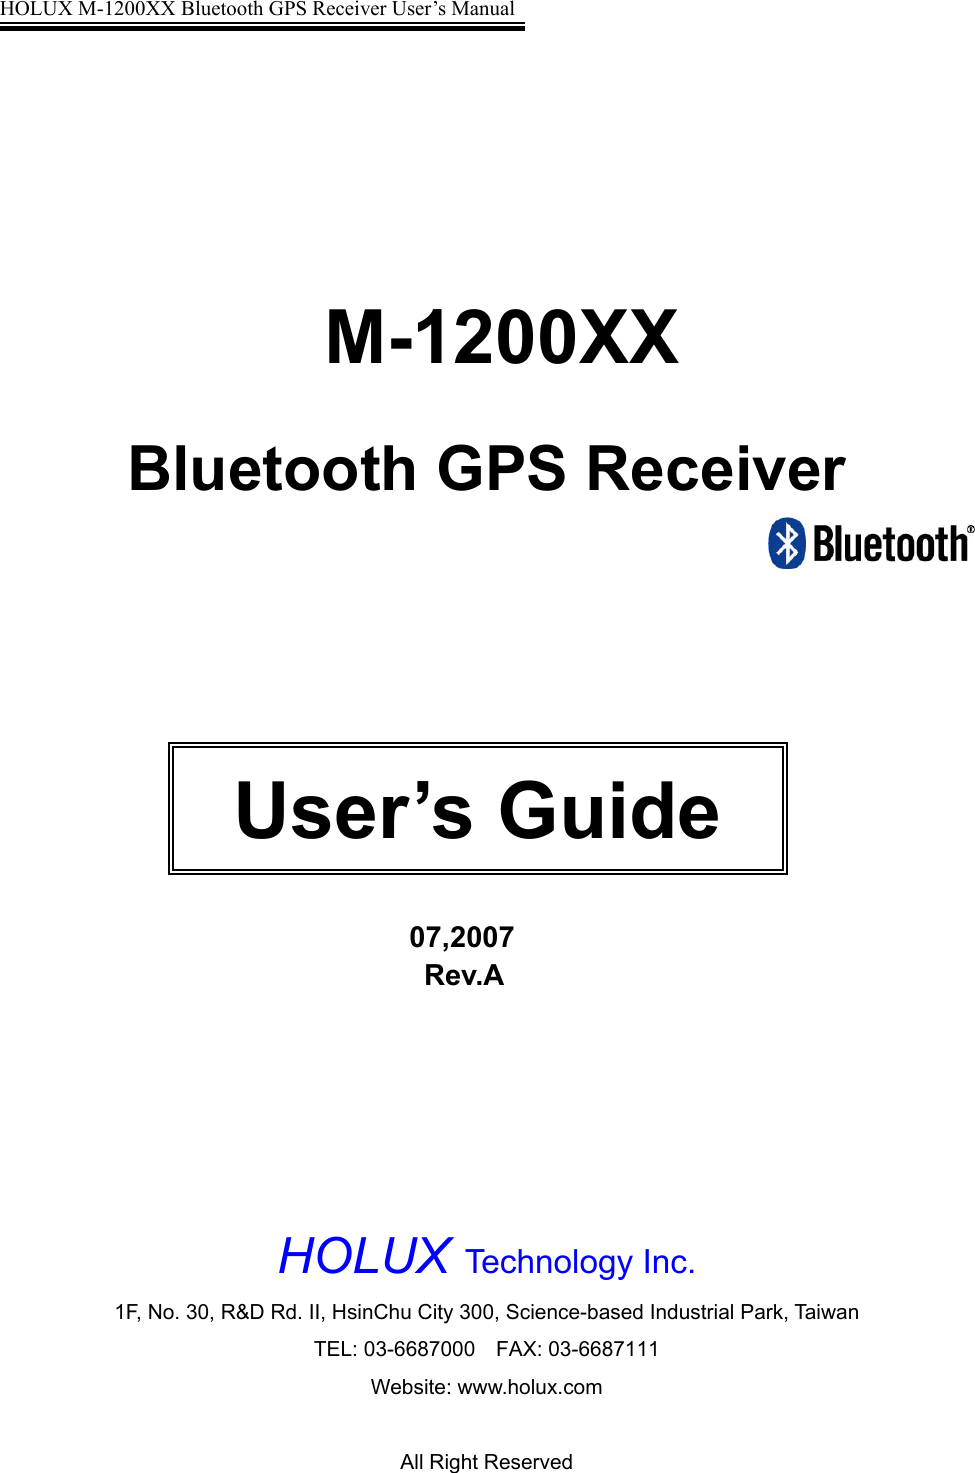 HOLUX M-1200XX Bluetooth GPS Receiver User’s Manual                                                           M-1200XX  Bluetooth GPS Receiver                                     07,2007                              Rev.A       HOLUX Technology Inc.  1F, No. 30, R&amp;D Rd. II, HsinChu City 300, Science-based Industrial Park, Taiwan TEL: 03-6687000  FAX: 03-6687111 Website: www.holux.com  All Right Reserved User’s Guide 